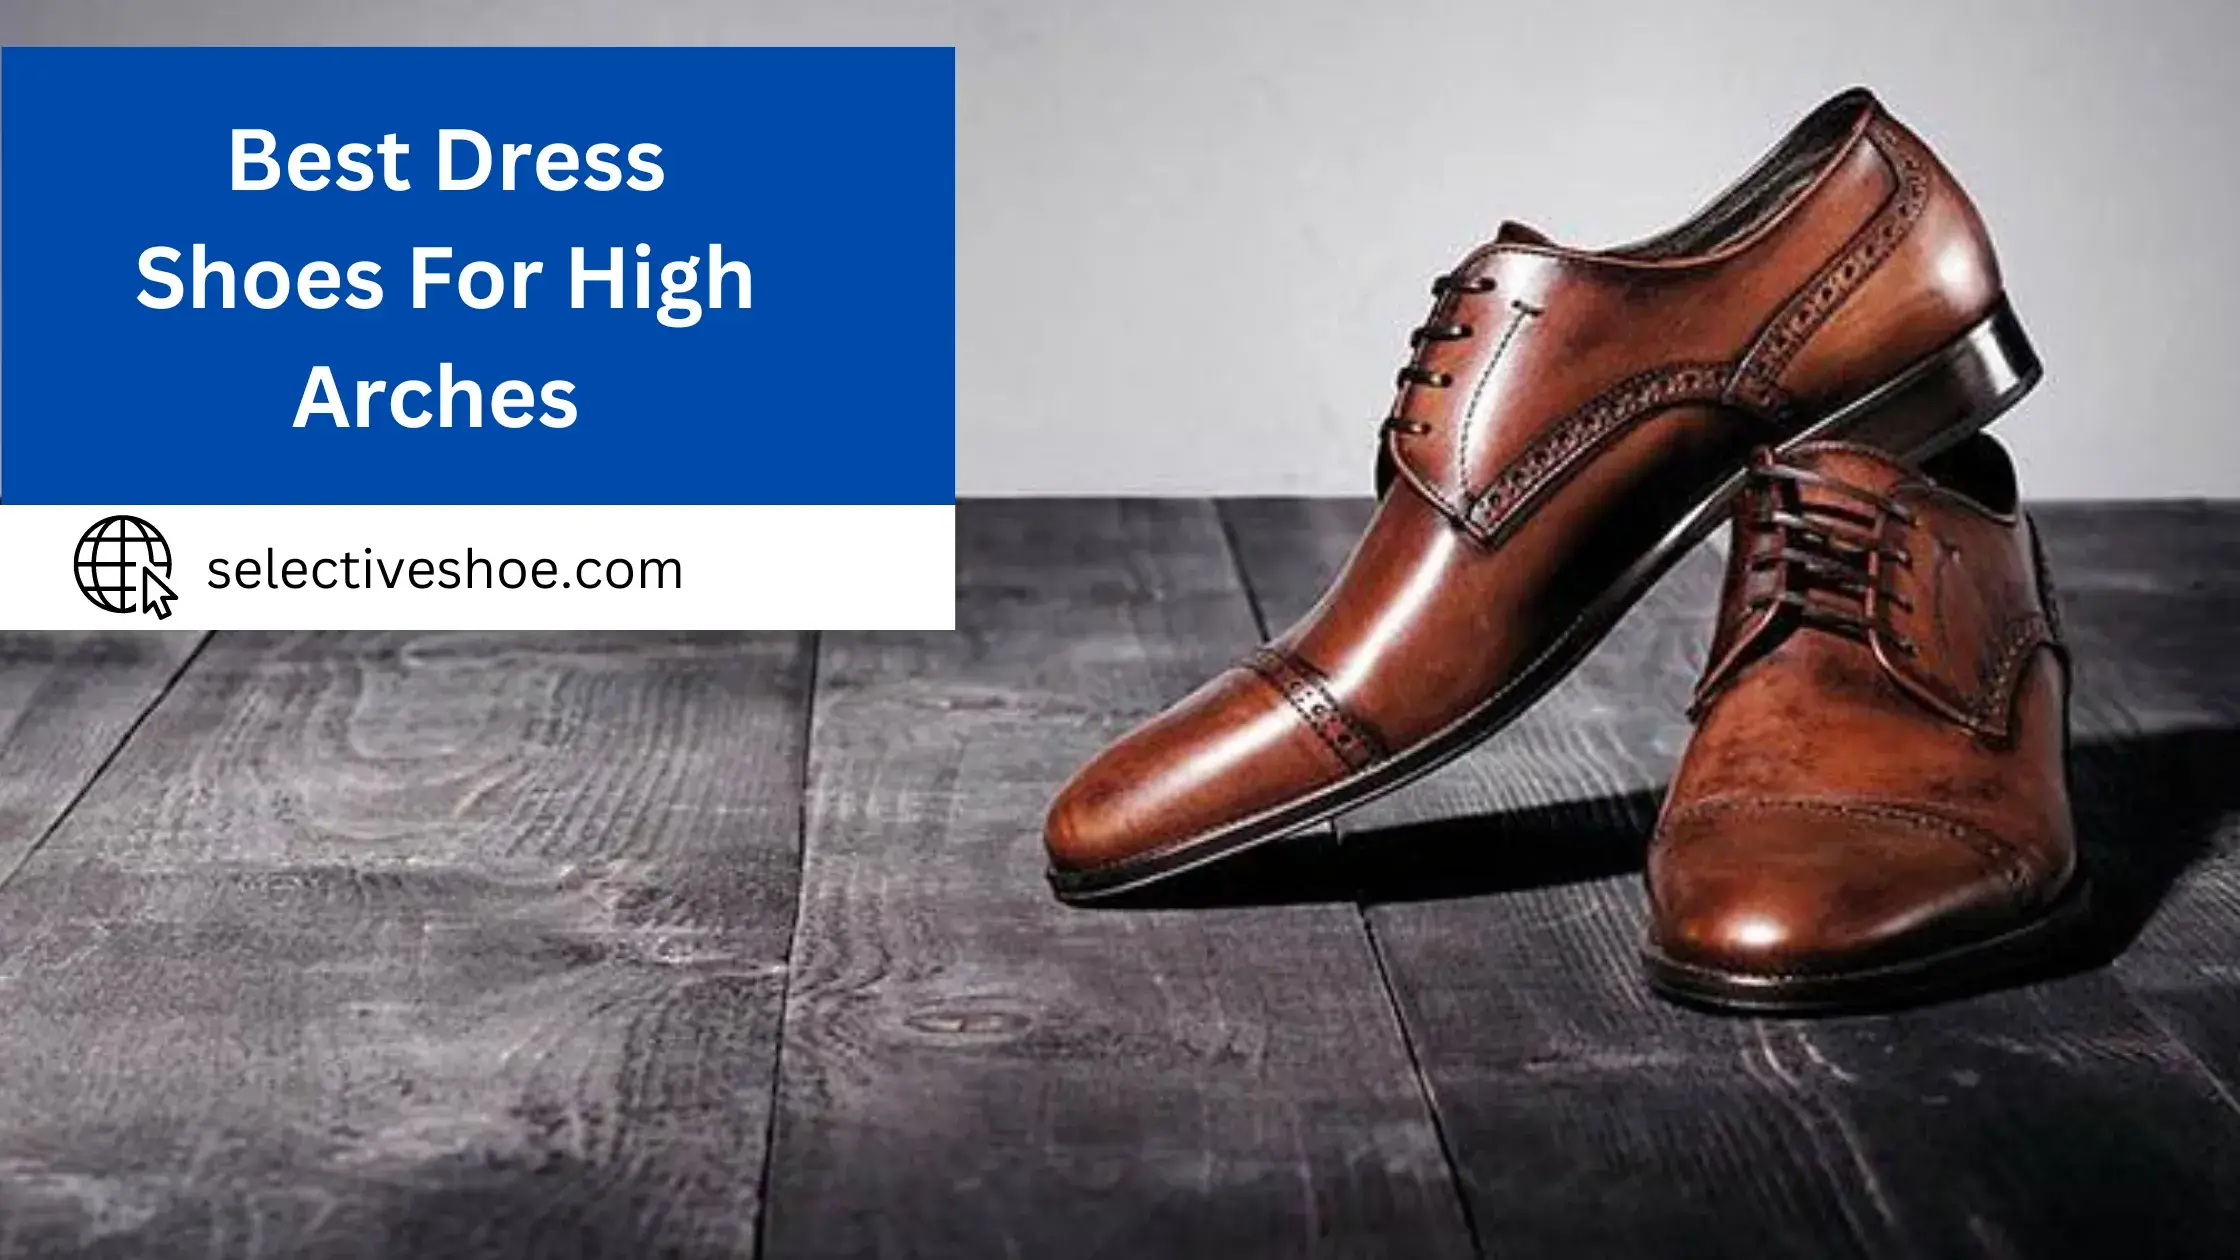 Best Dress Shoes For High Arches - Expert Choice